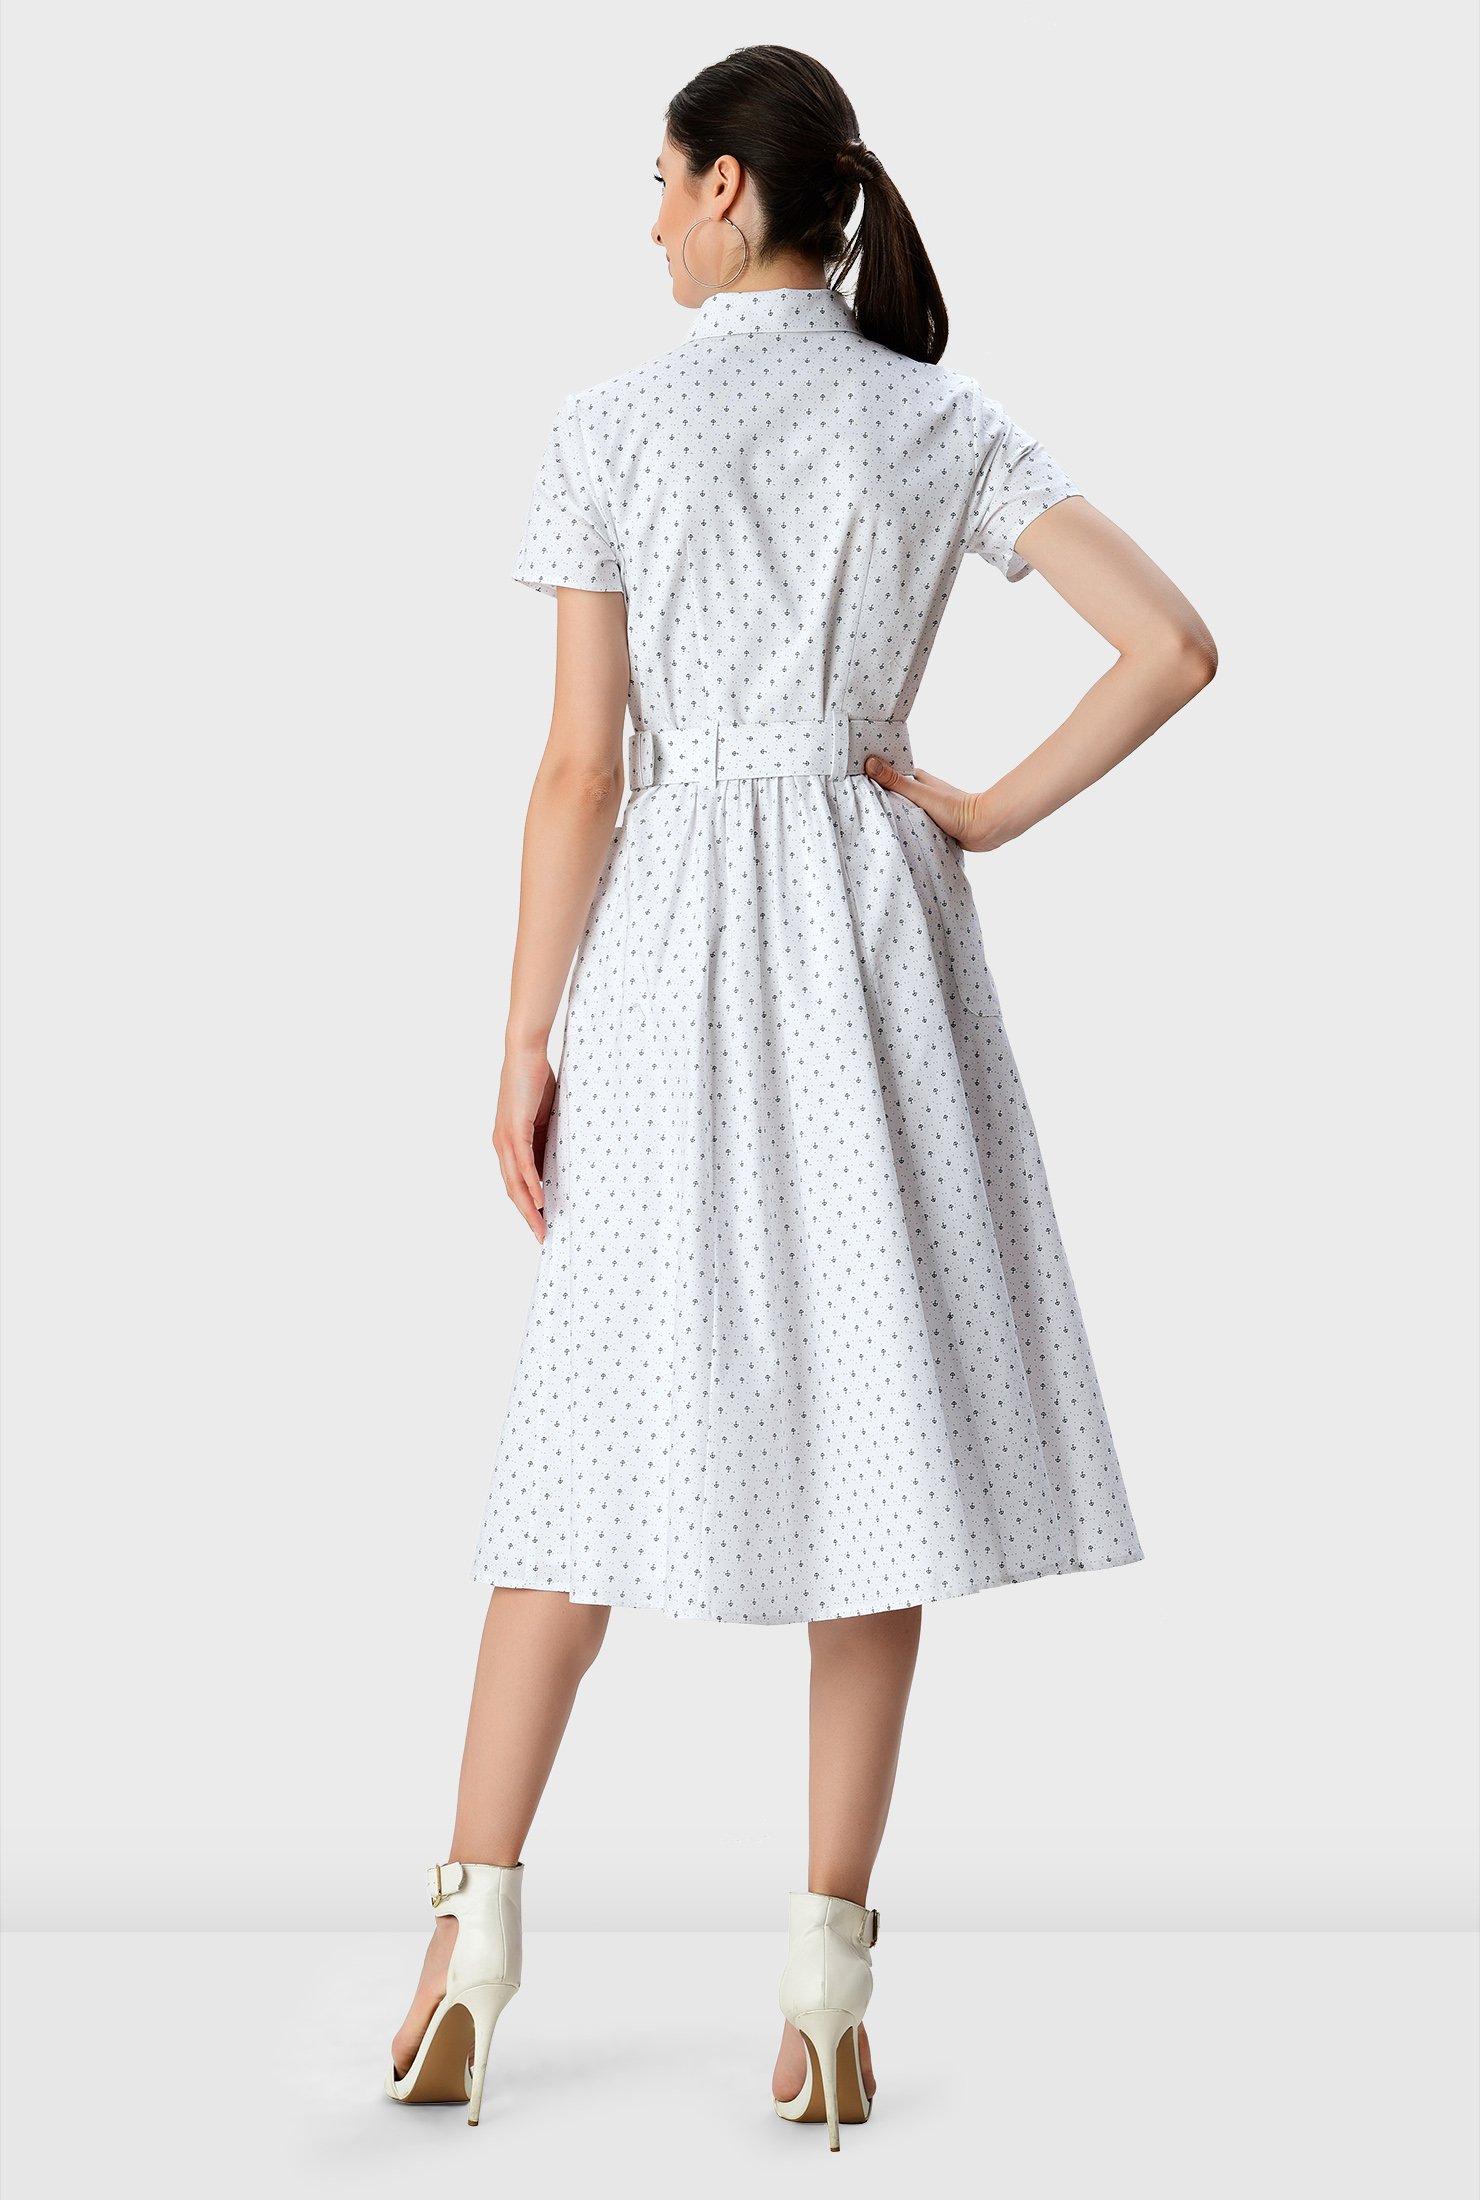 The best kind of dress for everyday wear, our button-down shirtdress made of crisp cotton poplin is ready for work, weekend and everything in between.